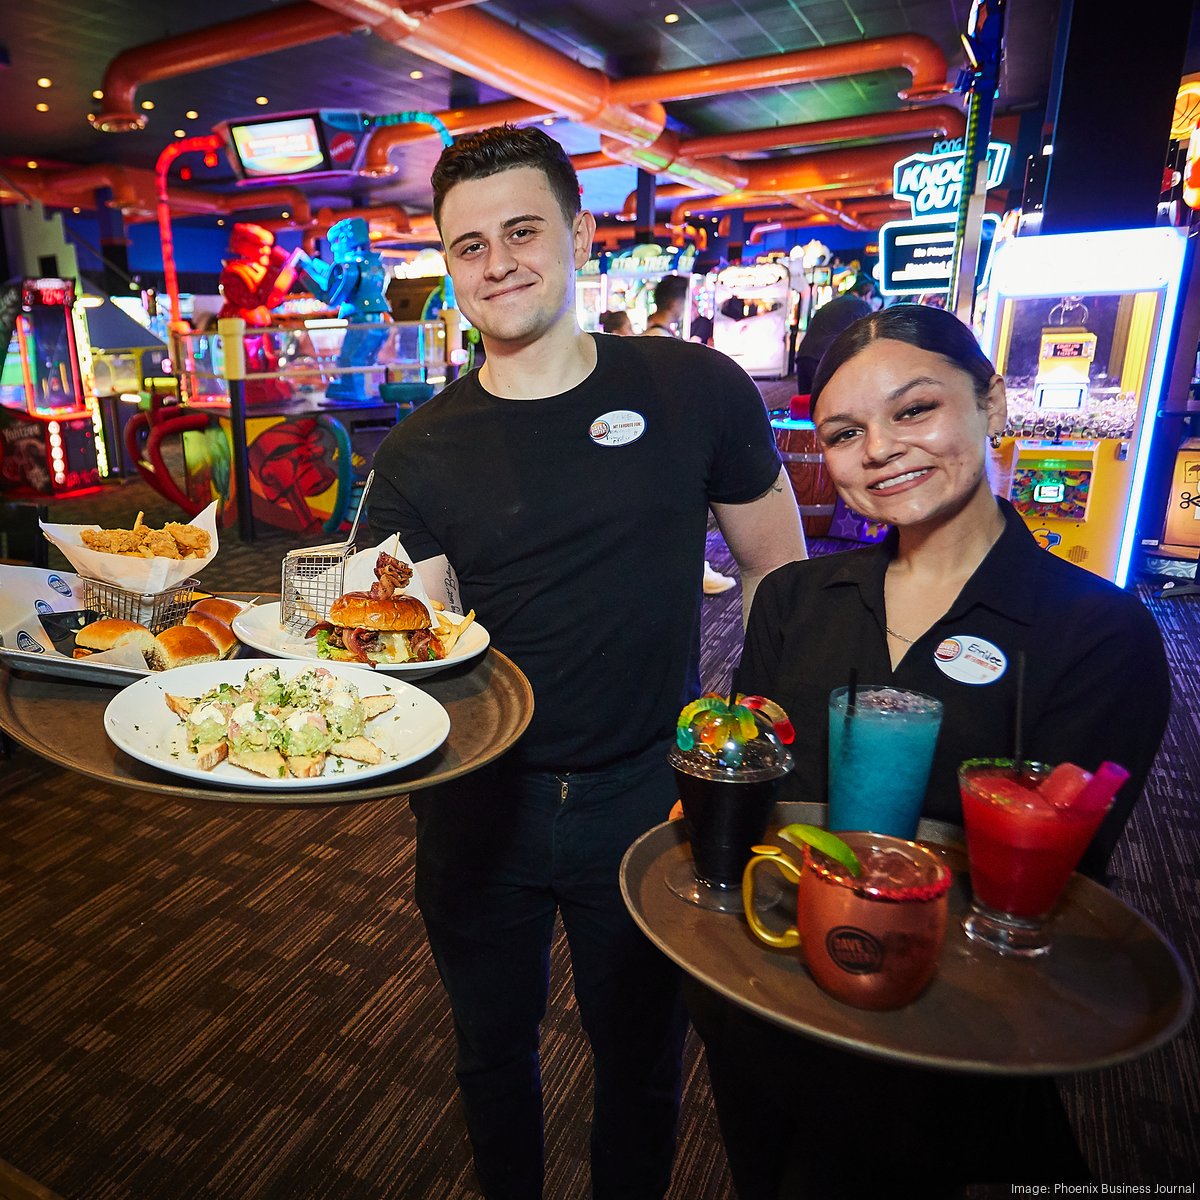 Dave & Buster's - Tempe Marketplace